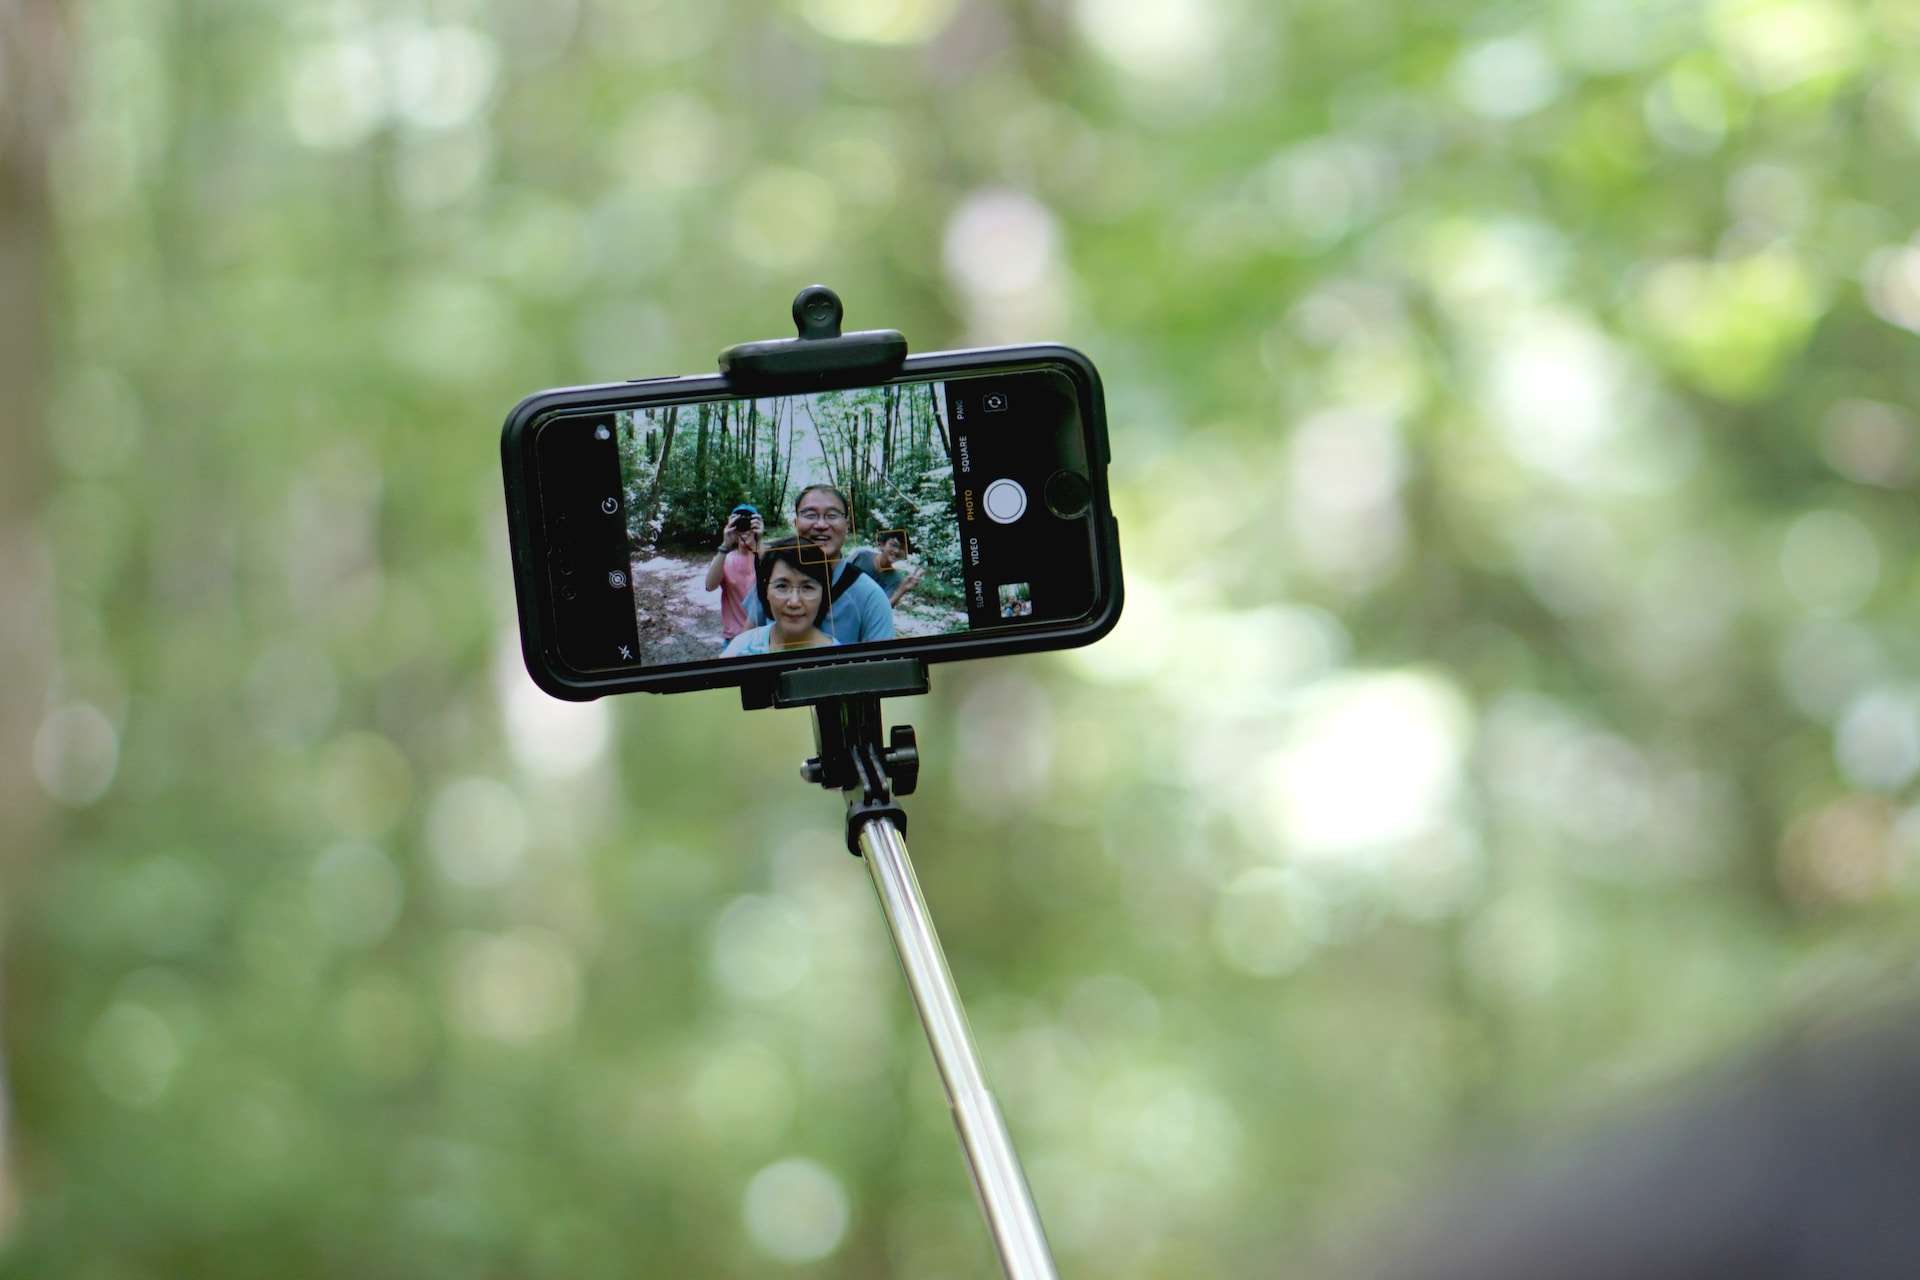 How to Connect a Selfie Stick to iPhone